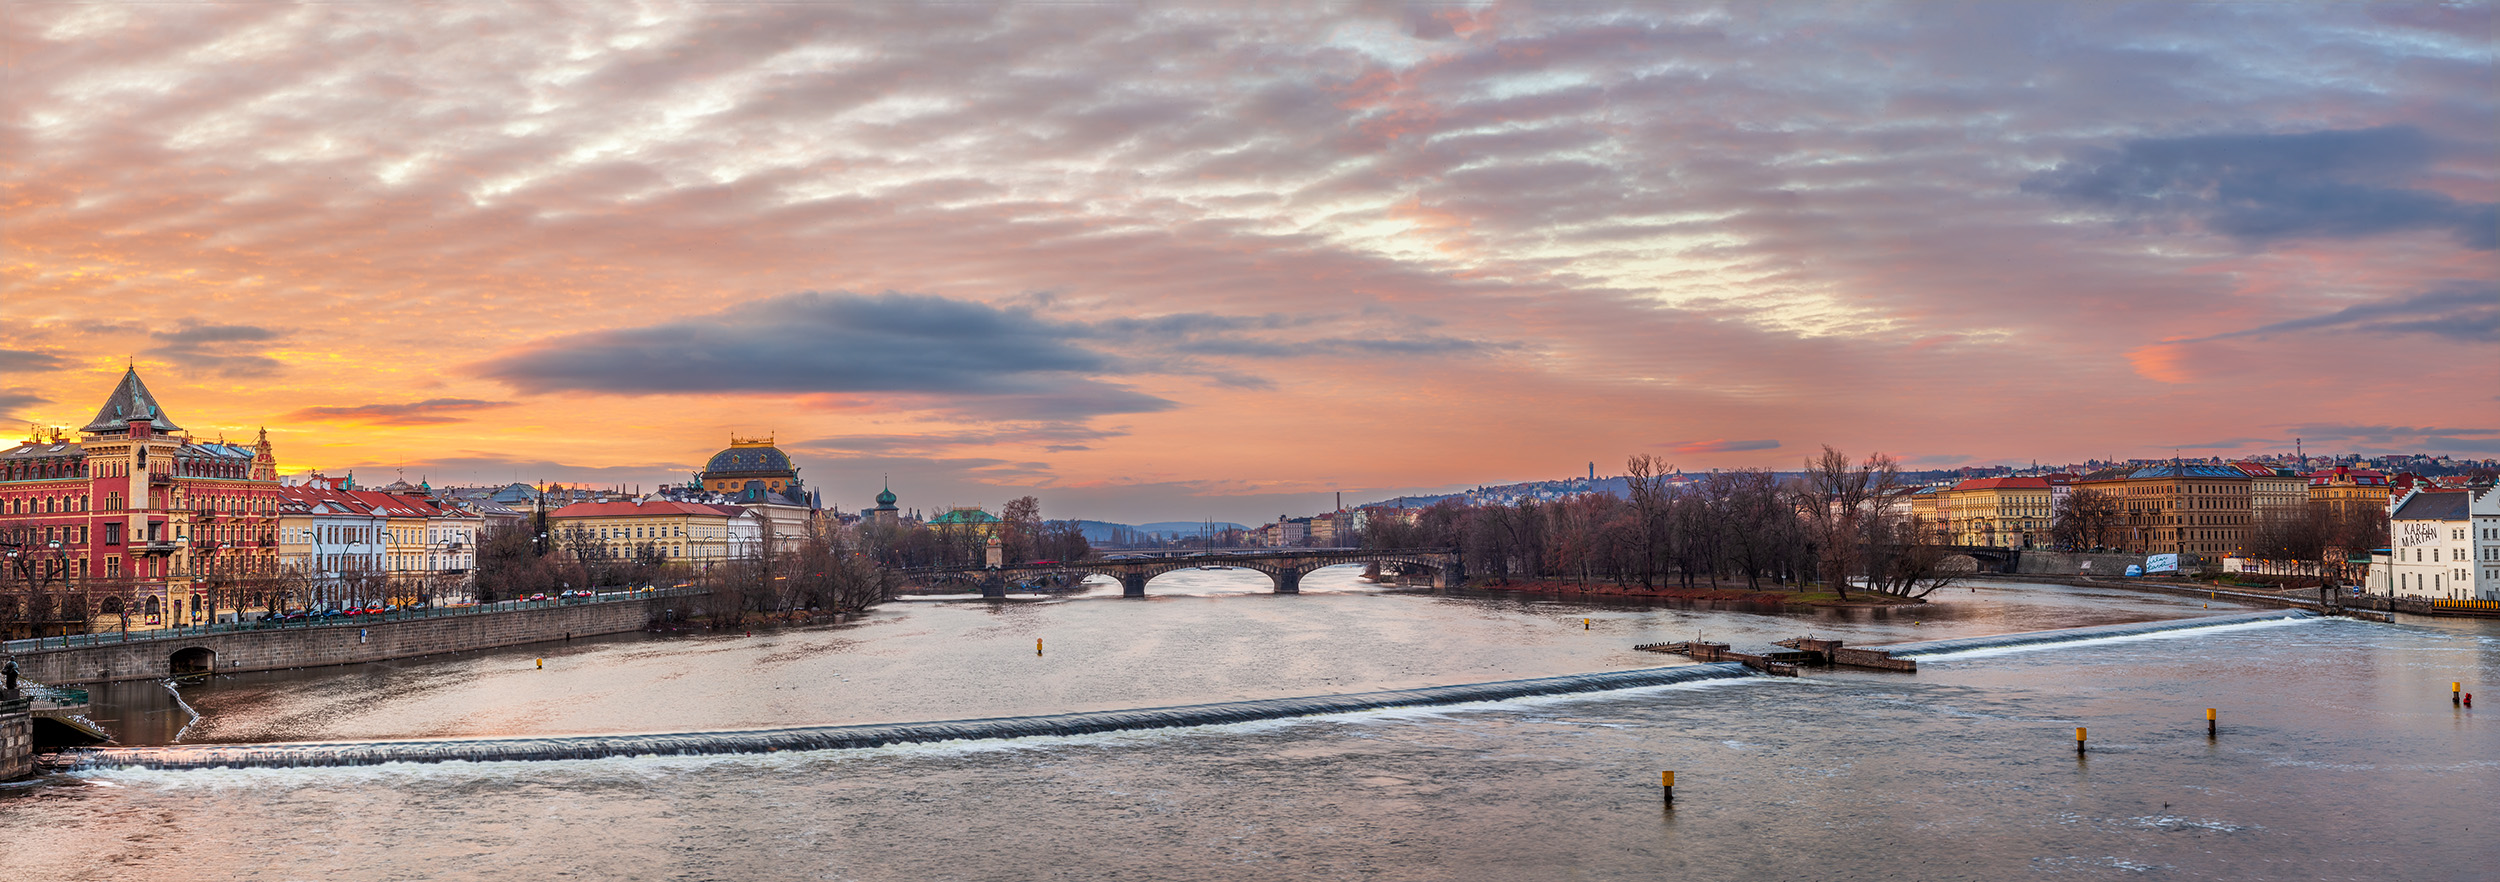 In the quietude of a winter morning, I captured the serene beauty of the Vltava River in Prague at sunrise. The frigid air painted...